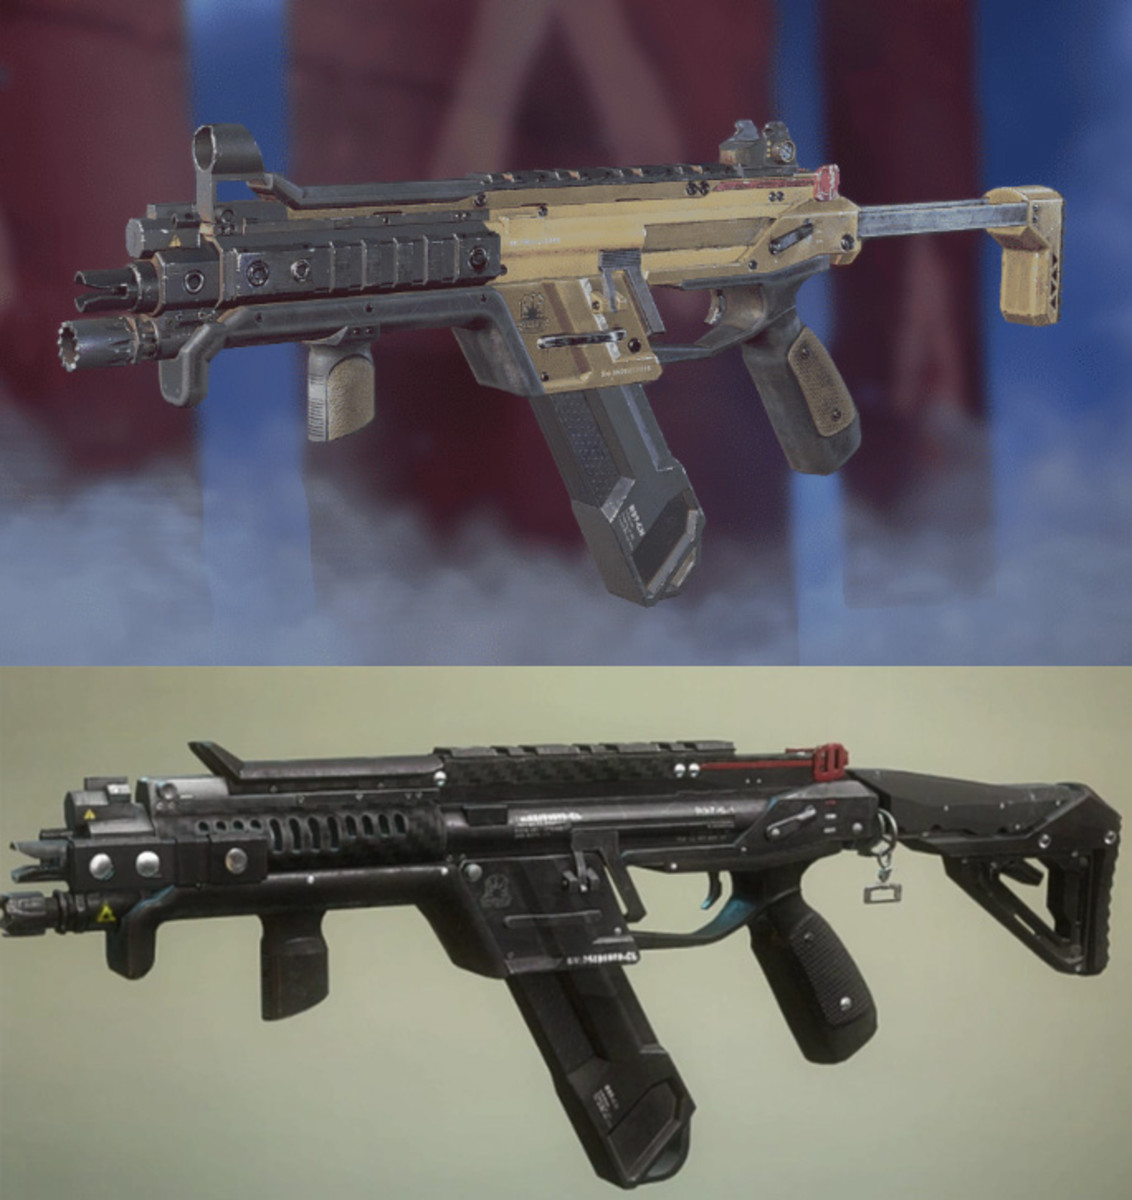 A side-by-side comparison of the R-97 Compact SMG from Titanfall and the R-99 SMG from Apex Legends.